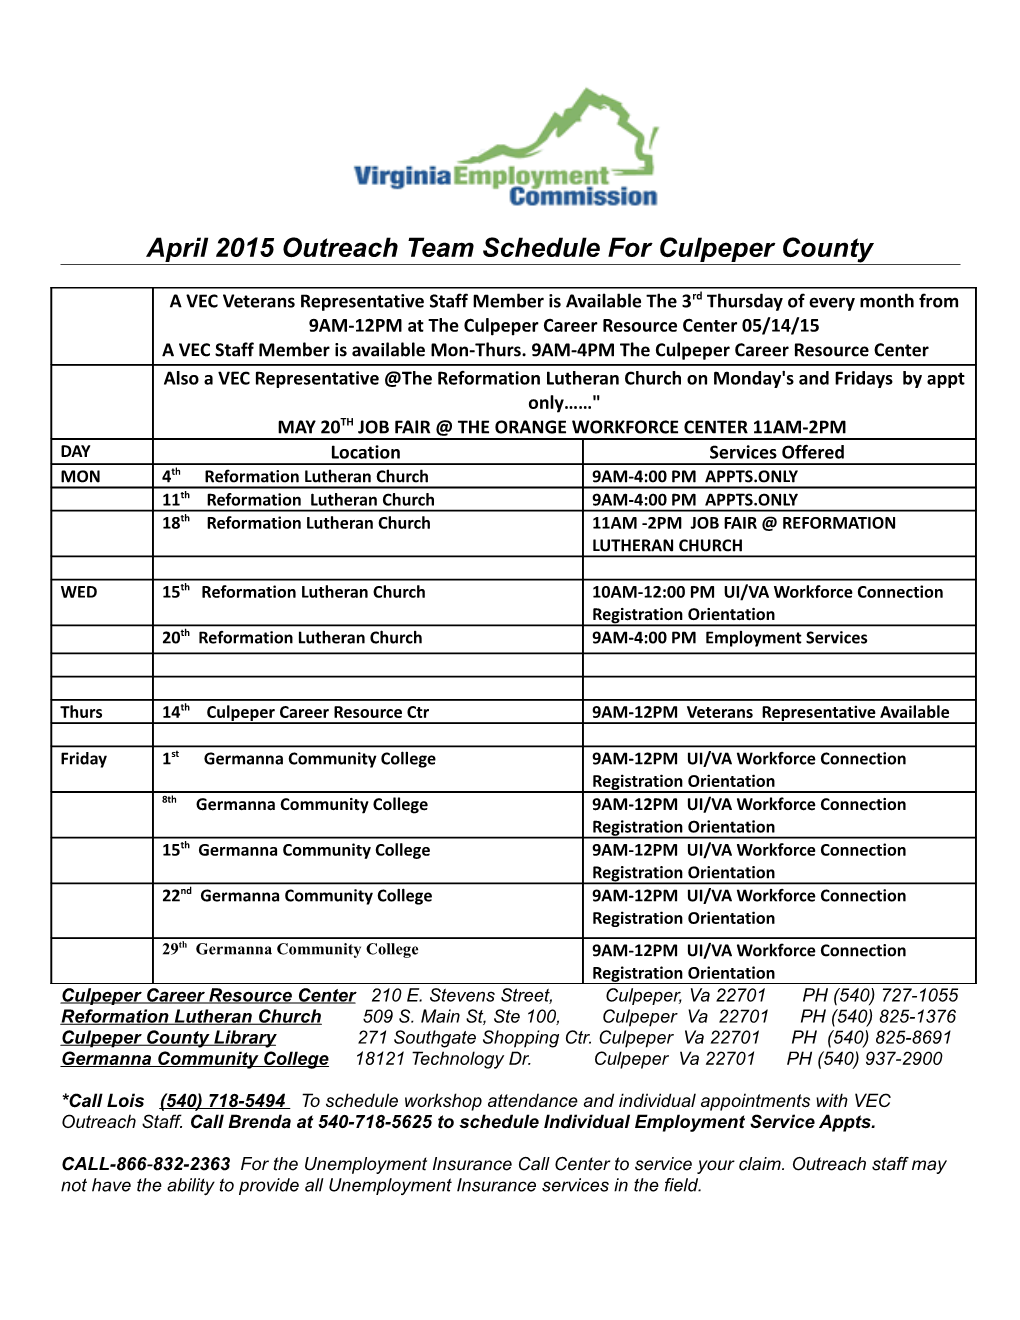 April 2015 Outreach Team Schedule for Culpeper County